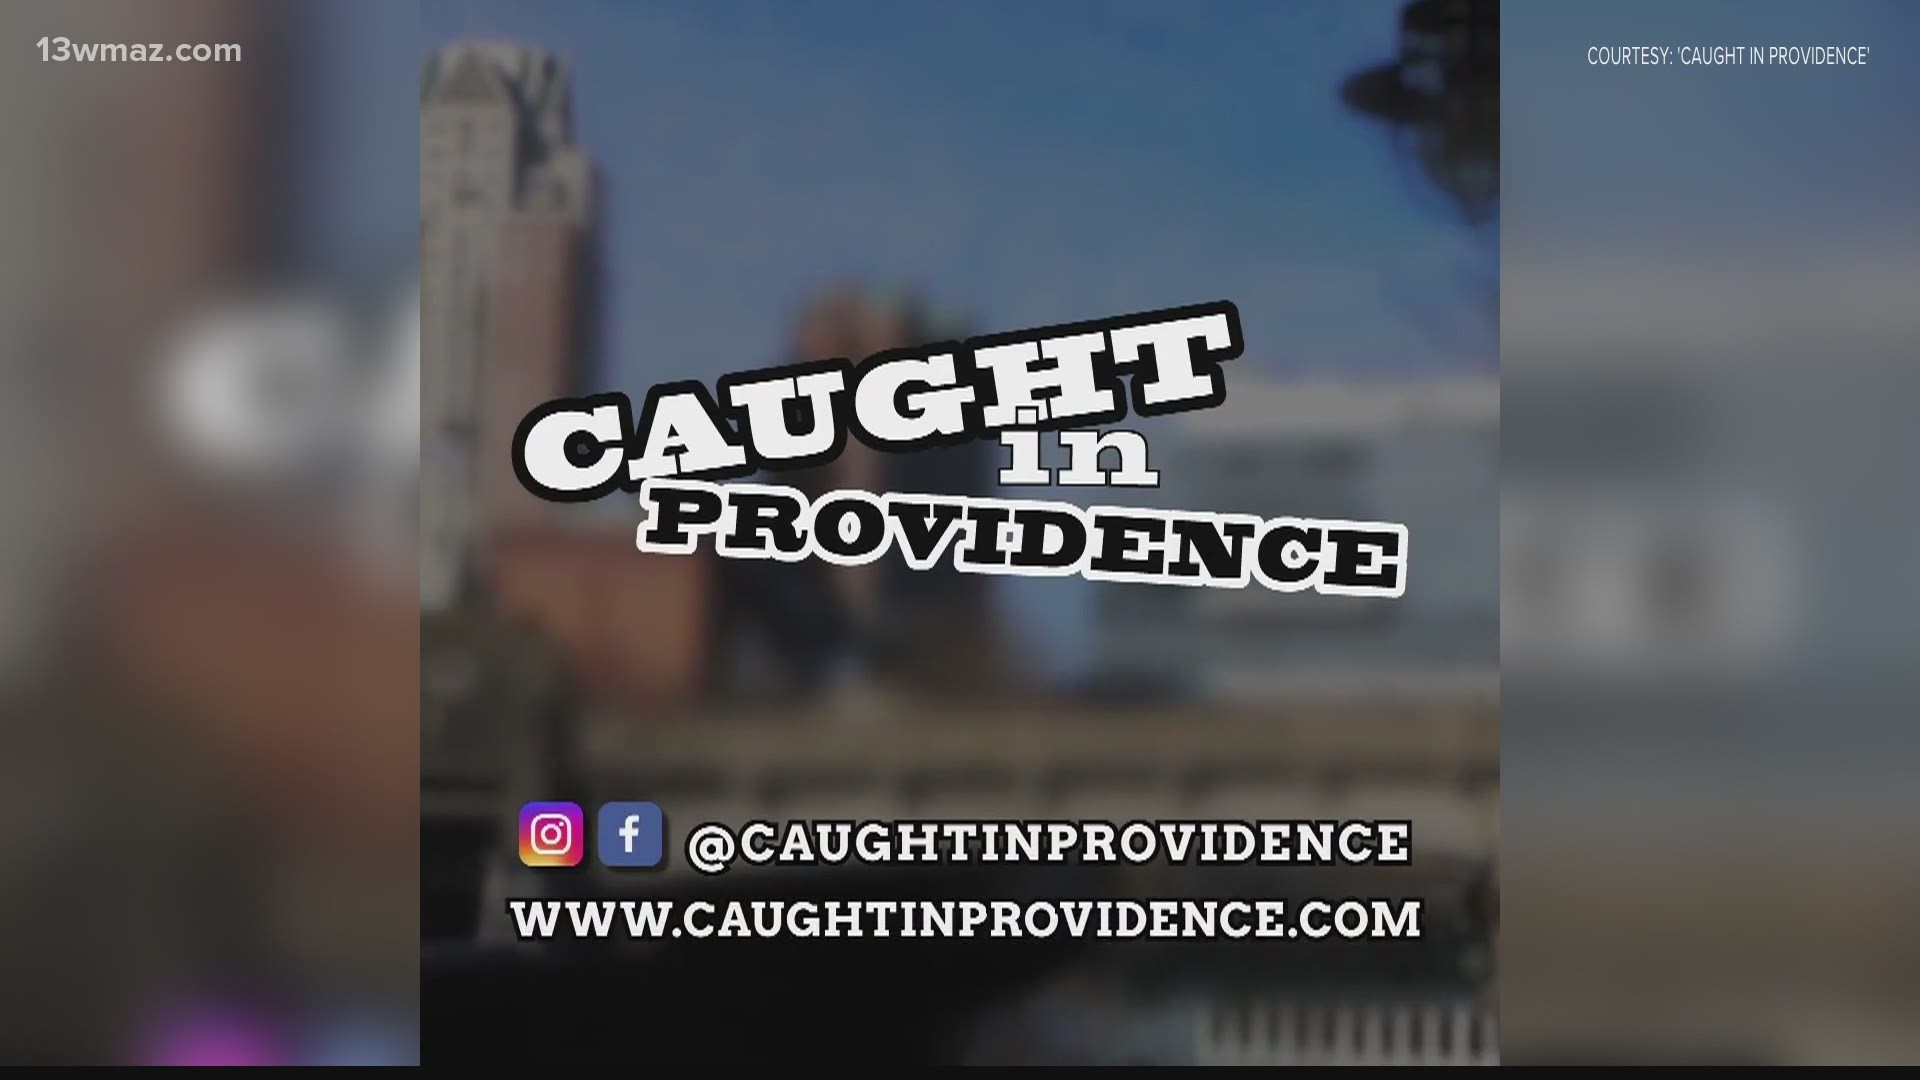 Chuck Shaheen says he wrote a letter and a $150 check to Judge Frank Caprio, who hosts 'Caught in Providence.' He hoped to give a break to someone who needed it.